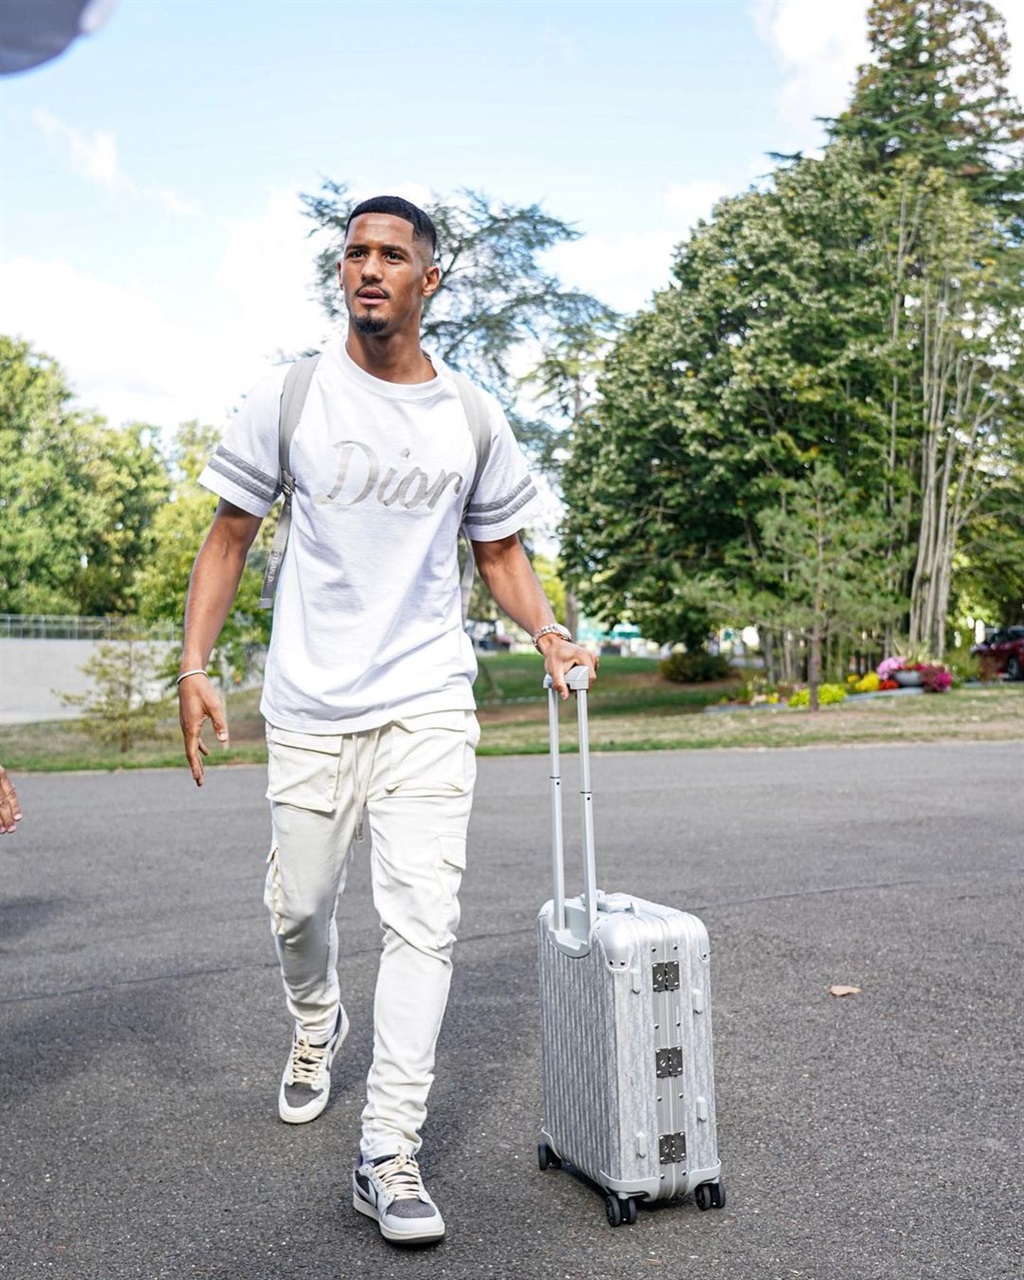 William Saliba arriving at Clairefontaine dripped 